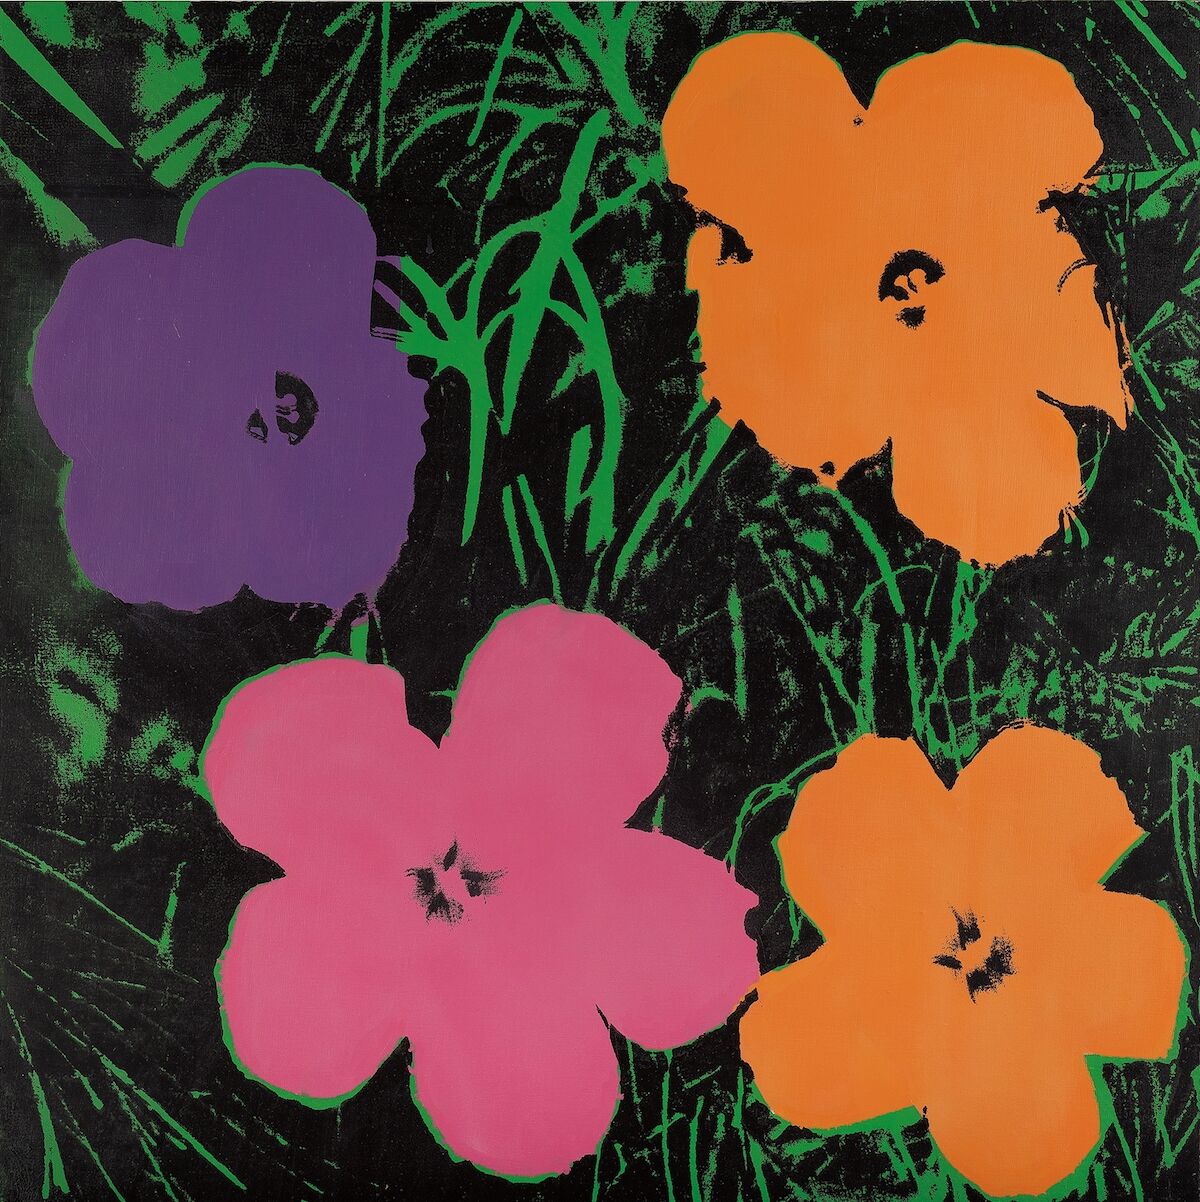 Andy Warhol, Late Four-Foot Flowers, 1967. Sold for $7.4 million. Courtesy Phillips.